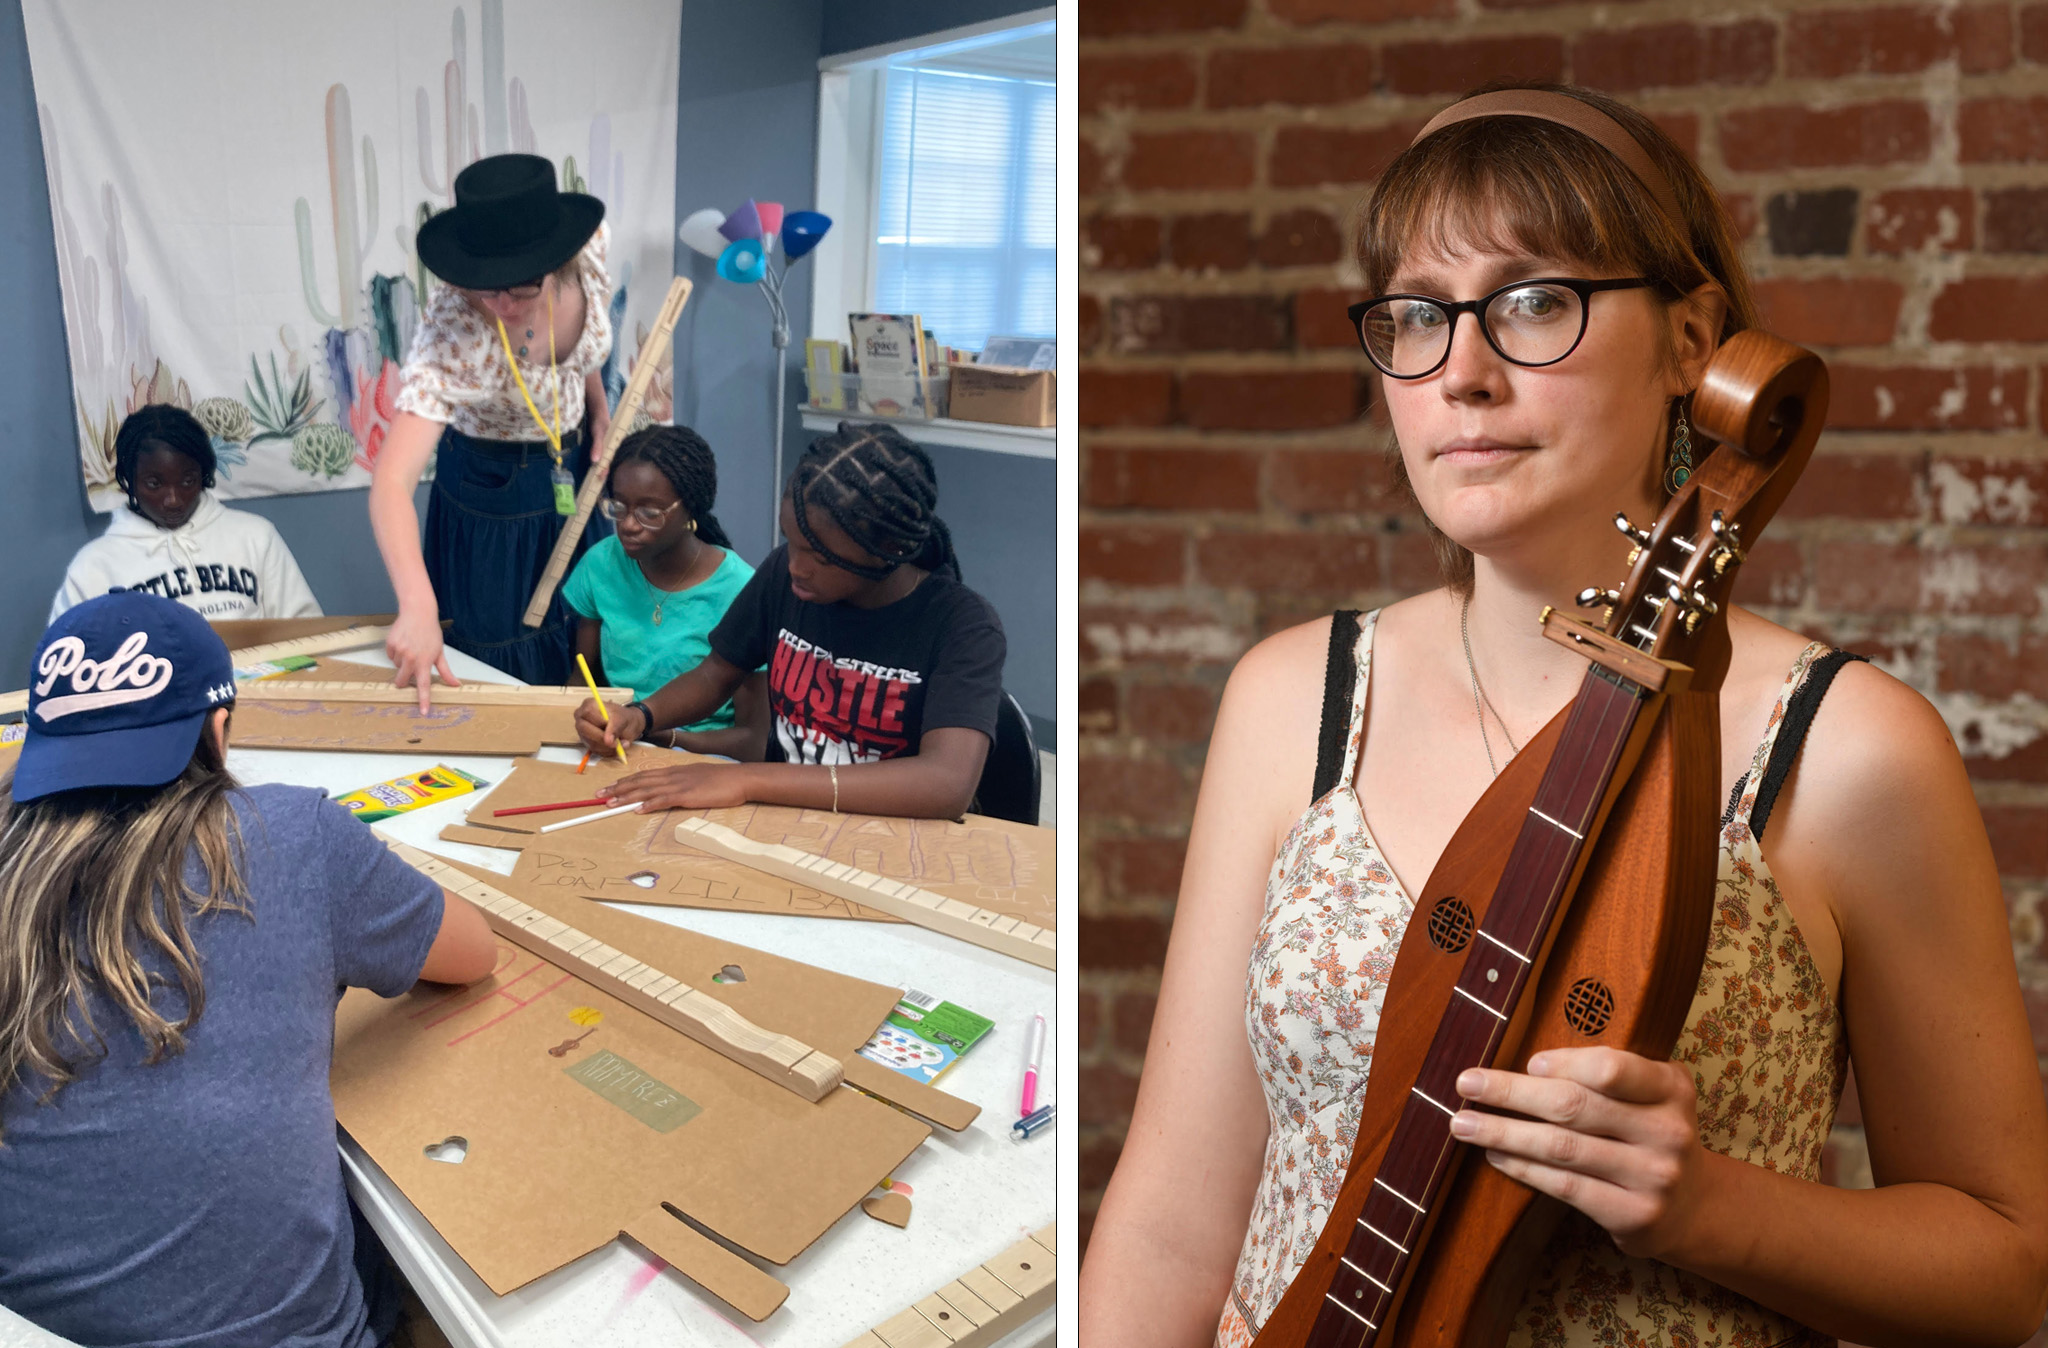 A collage of two photos, the first features children building cardboard dulcimers, the other is a photo of Roxanne McDaniel holding a dulcimer.